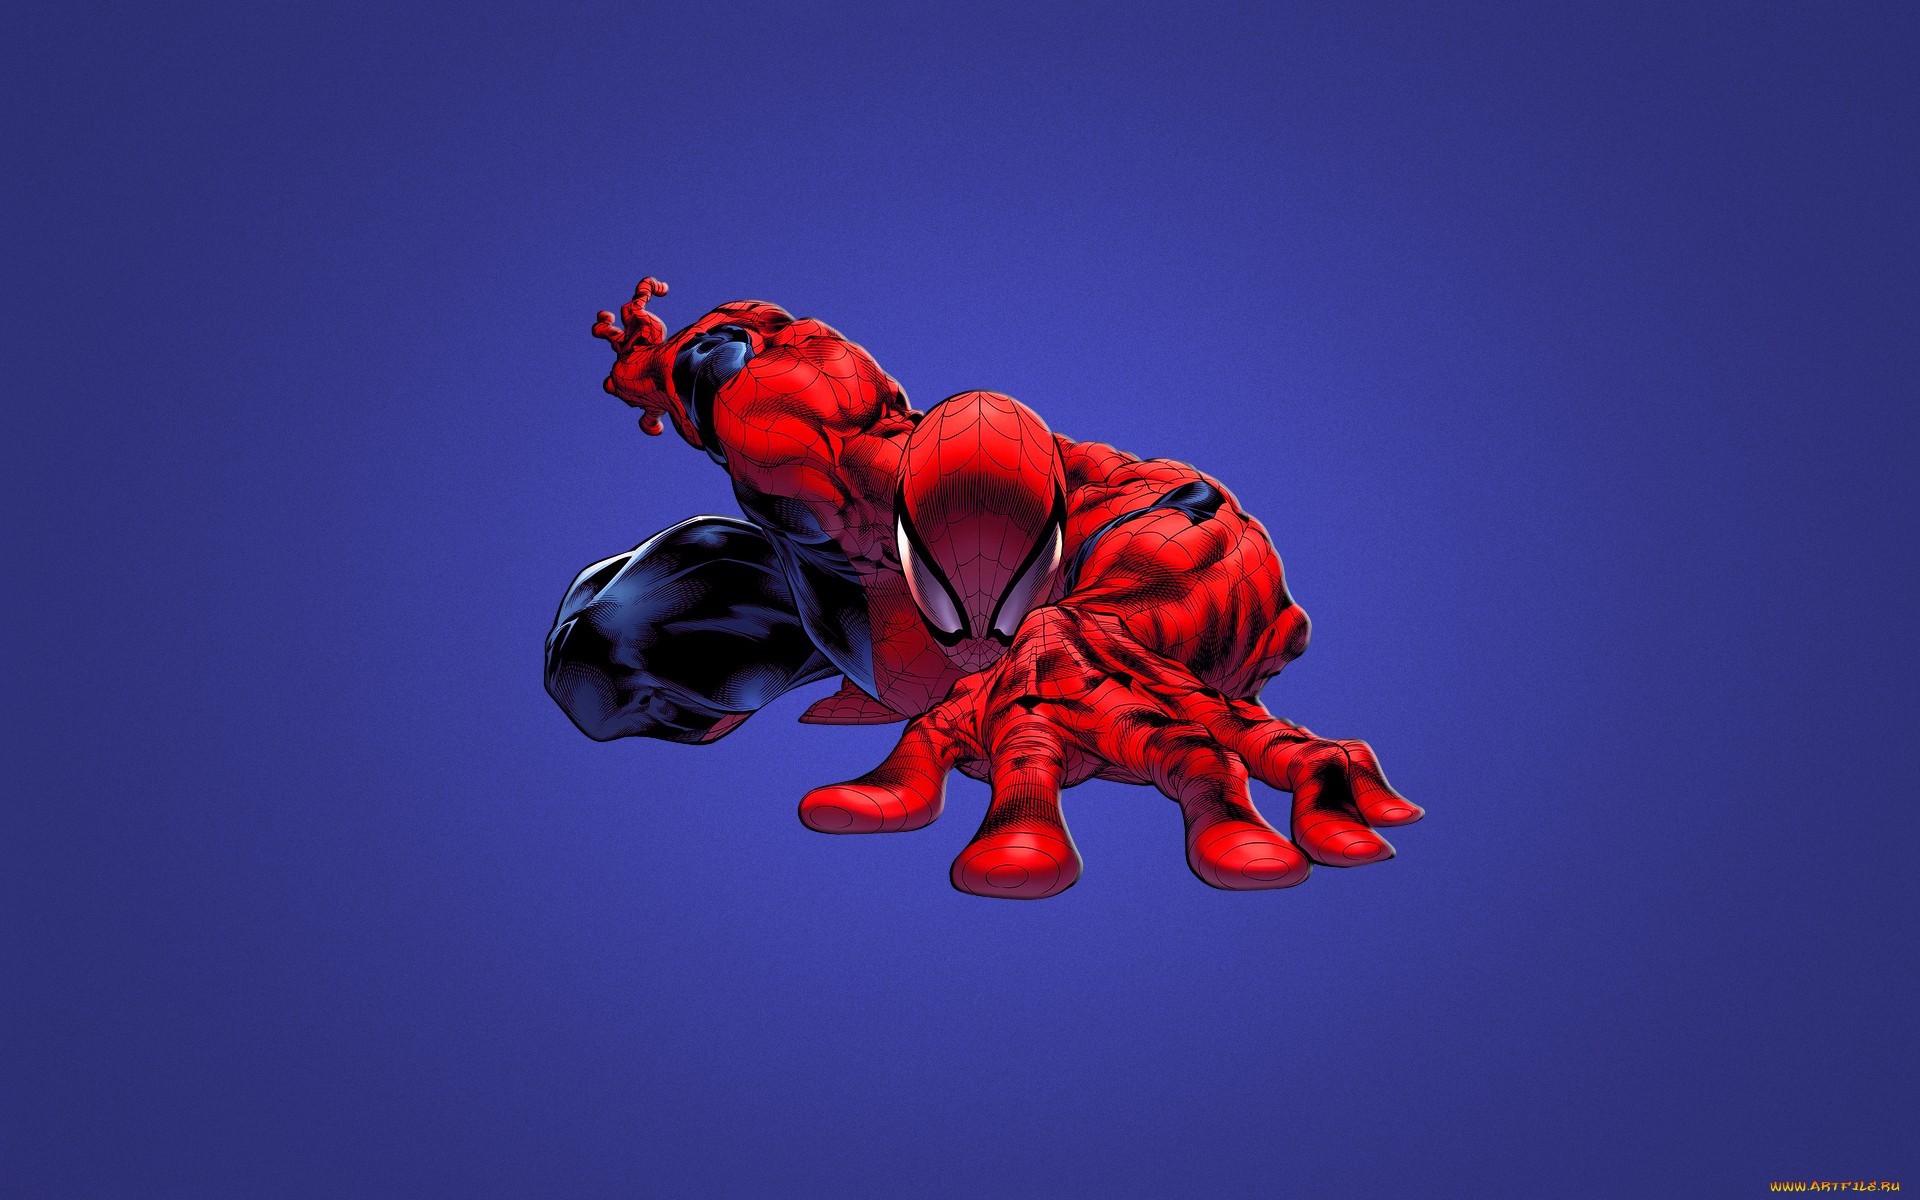 20380 download wallpaper spider man, cinema, background, blue screensavers and pictures for free